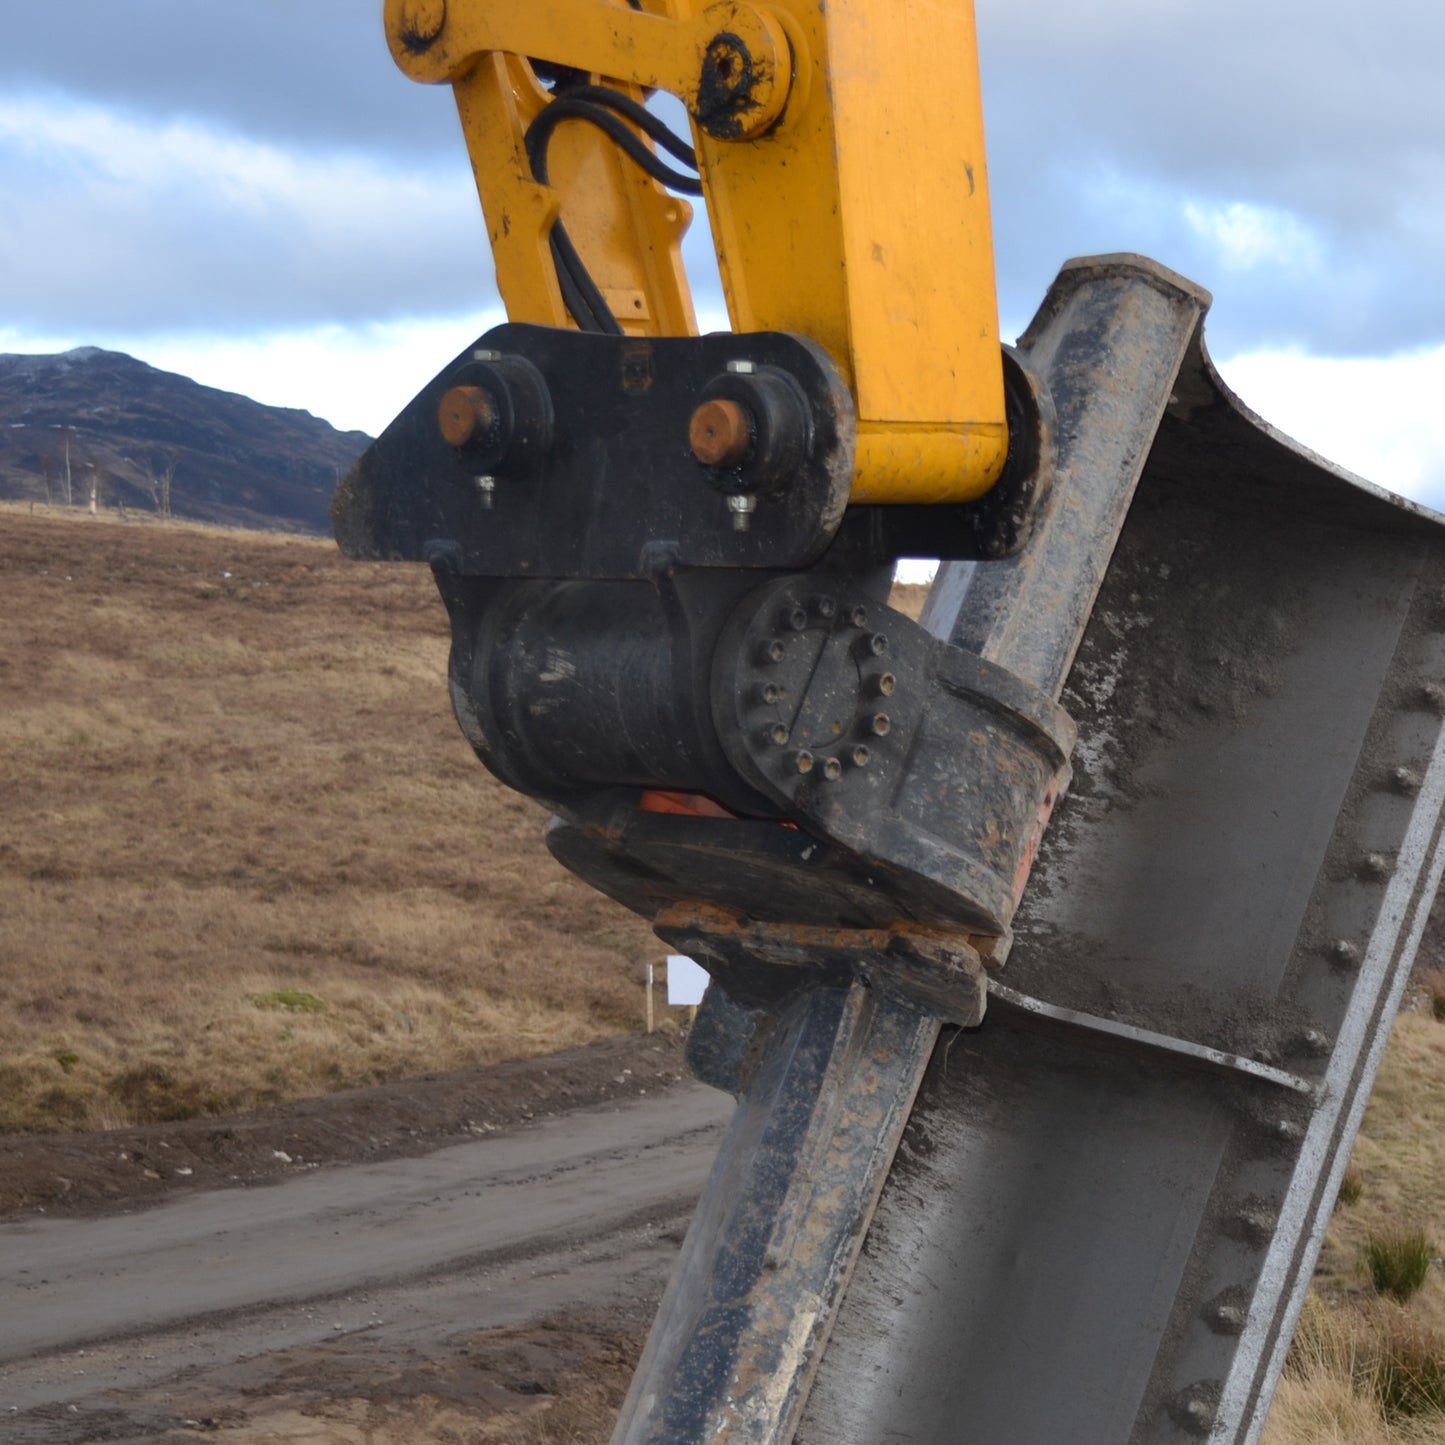 ROCKLAND HKR-T TILTING COUPLER WITH XTRA-TILT POWER ACTUATOR FOR EXCAVATOR